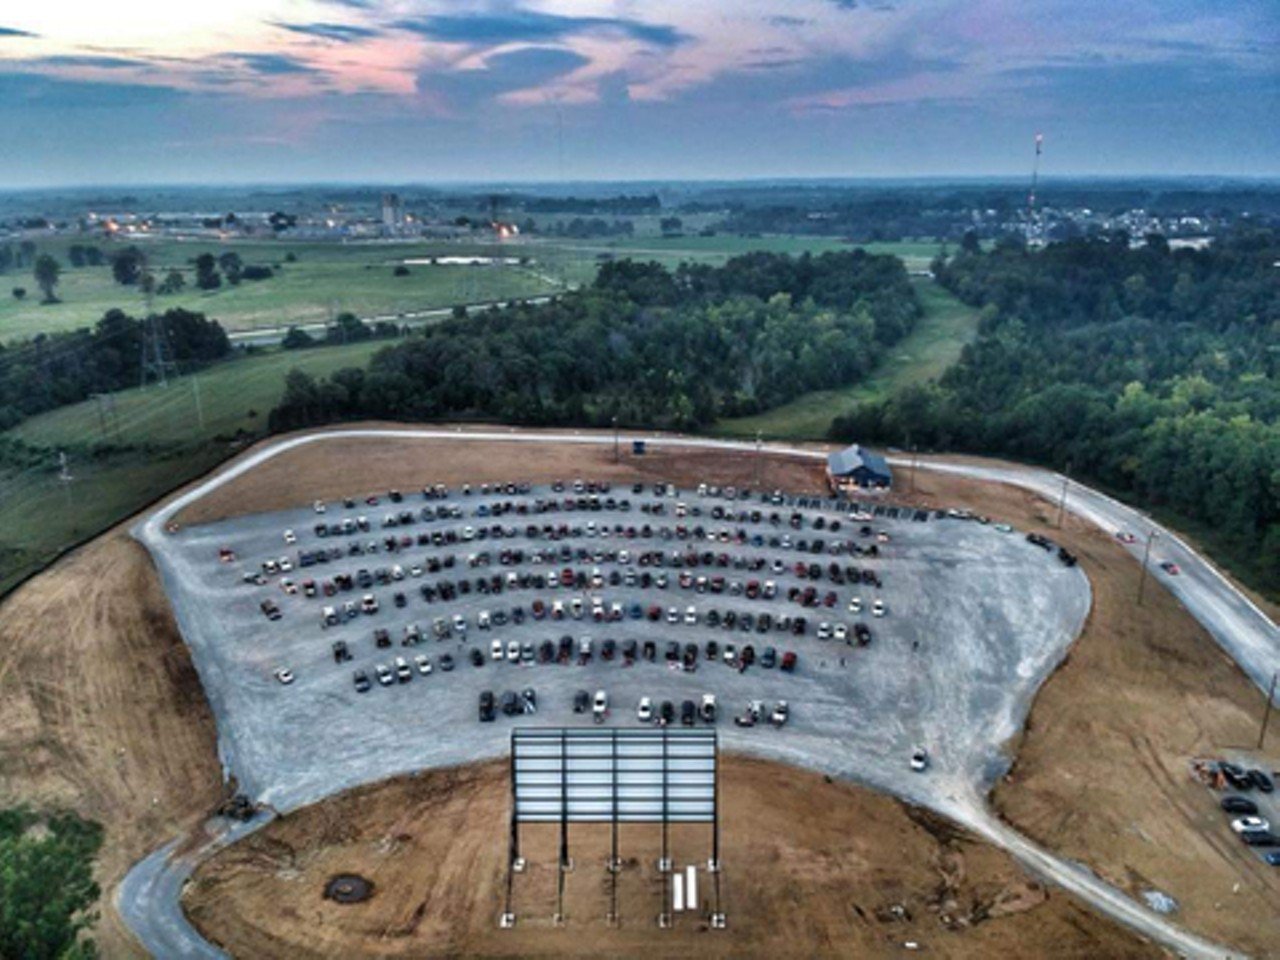 Sauerbeck Family Drive-In
3210 D.W. Griffith LaneThis drive-in movie theater is single-screen, and opened in August 2018. It’s located in LaGrange, nearly 20 miles from Louisville. This theater allows credit cards and also allows leashed pets.